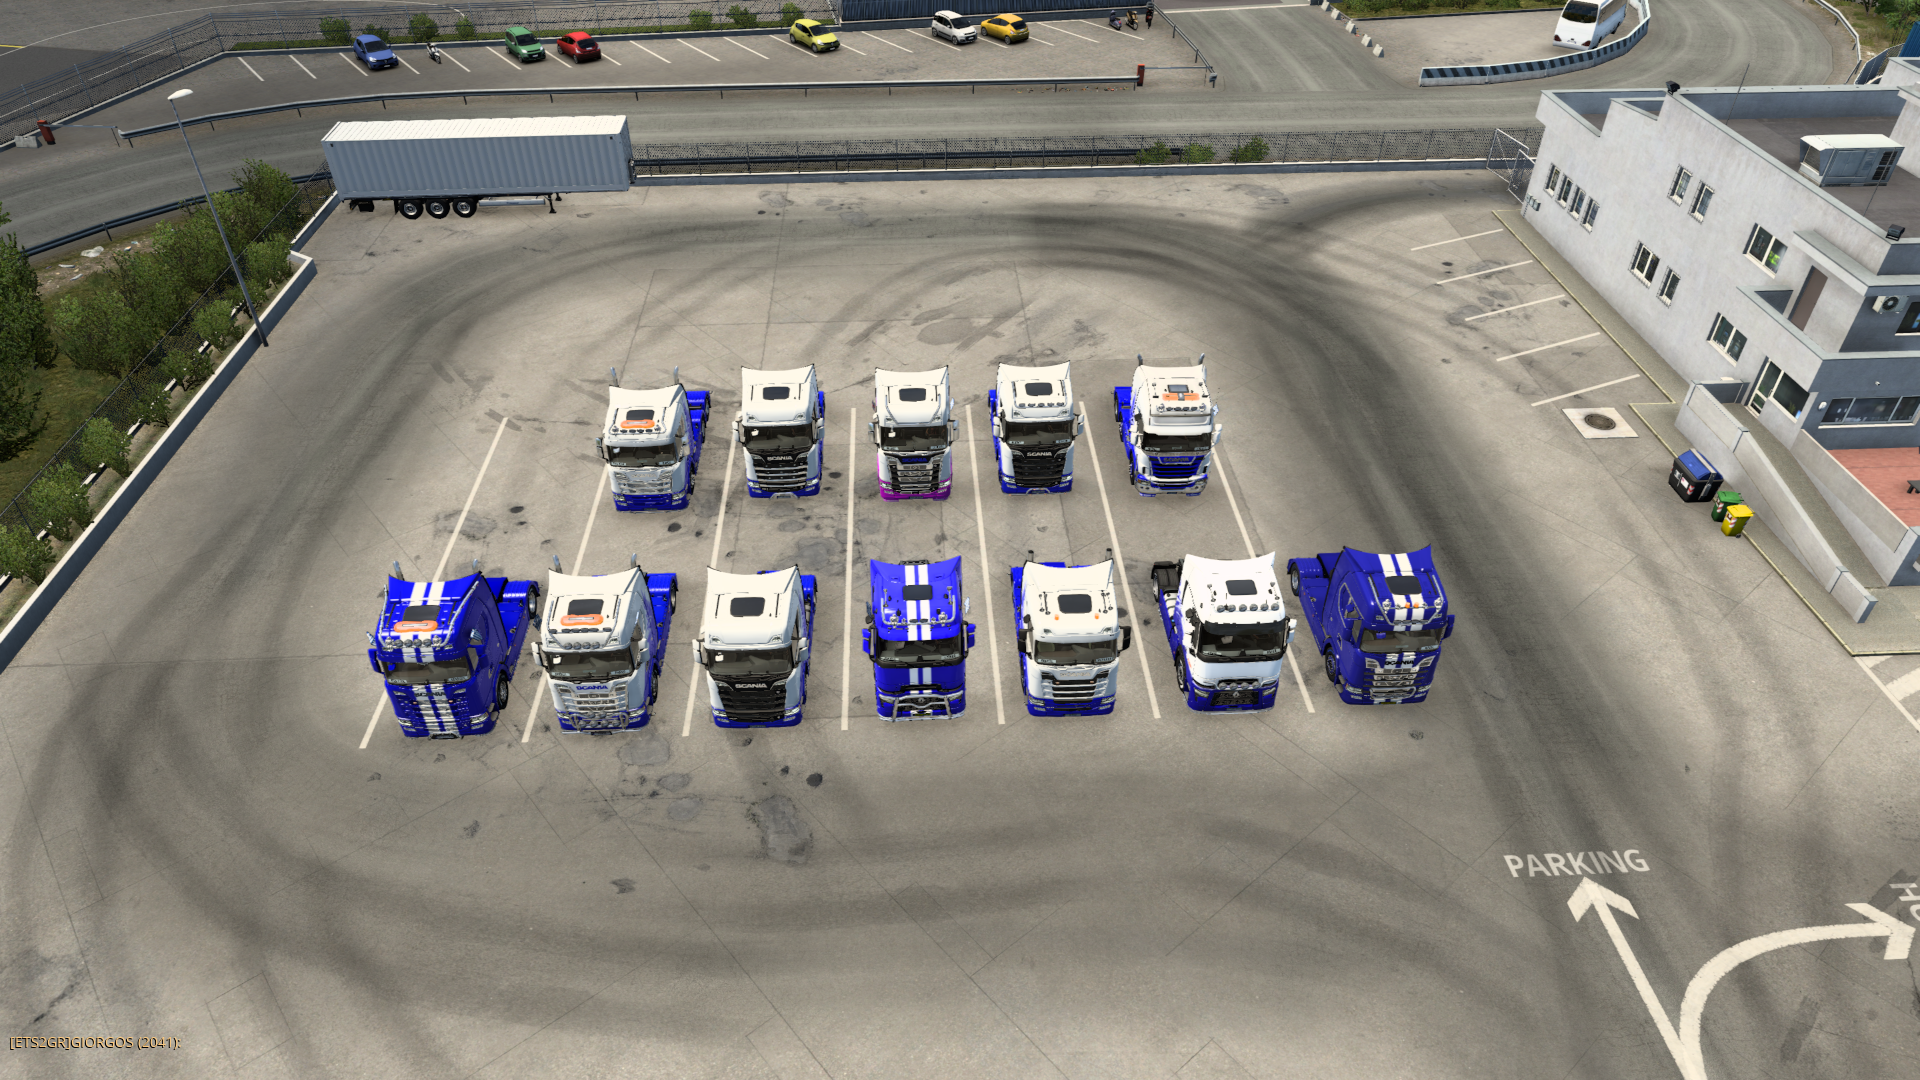 ets2_20210508_000448_00.png